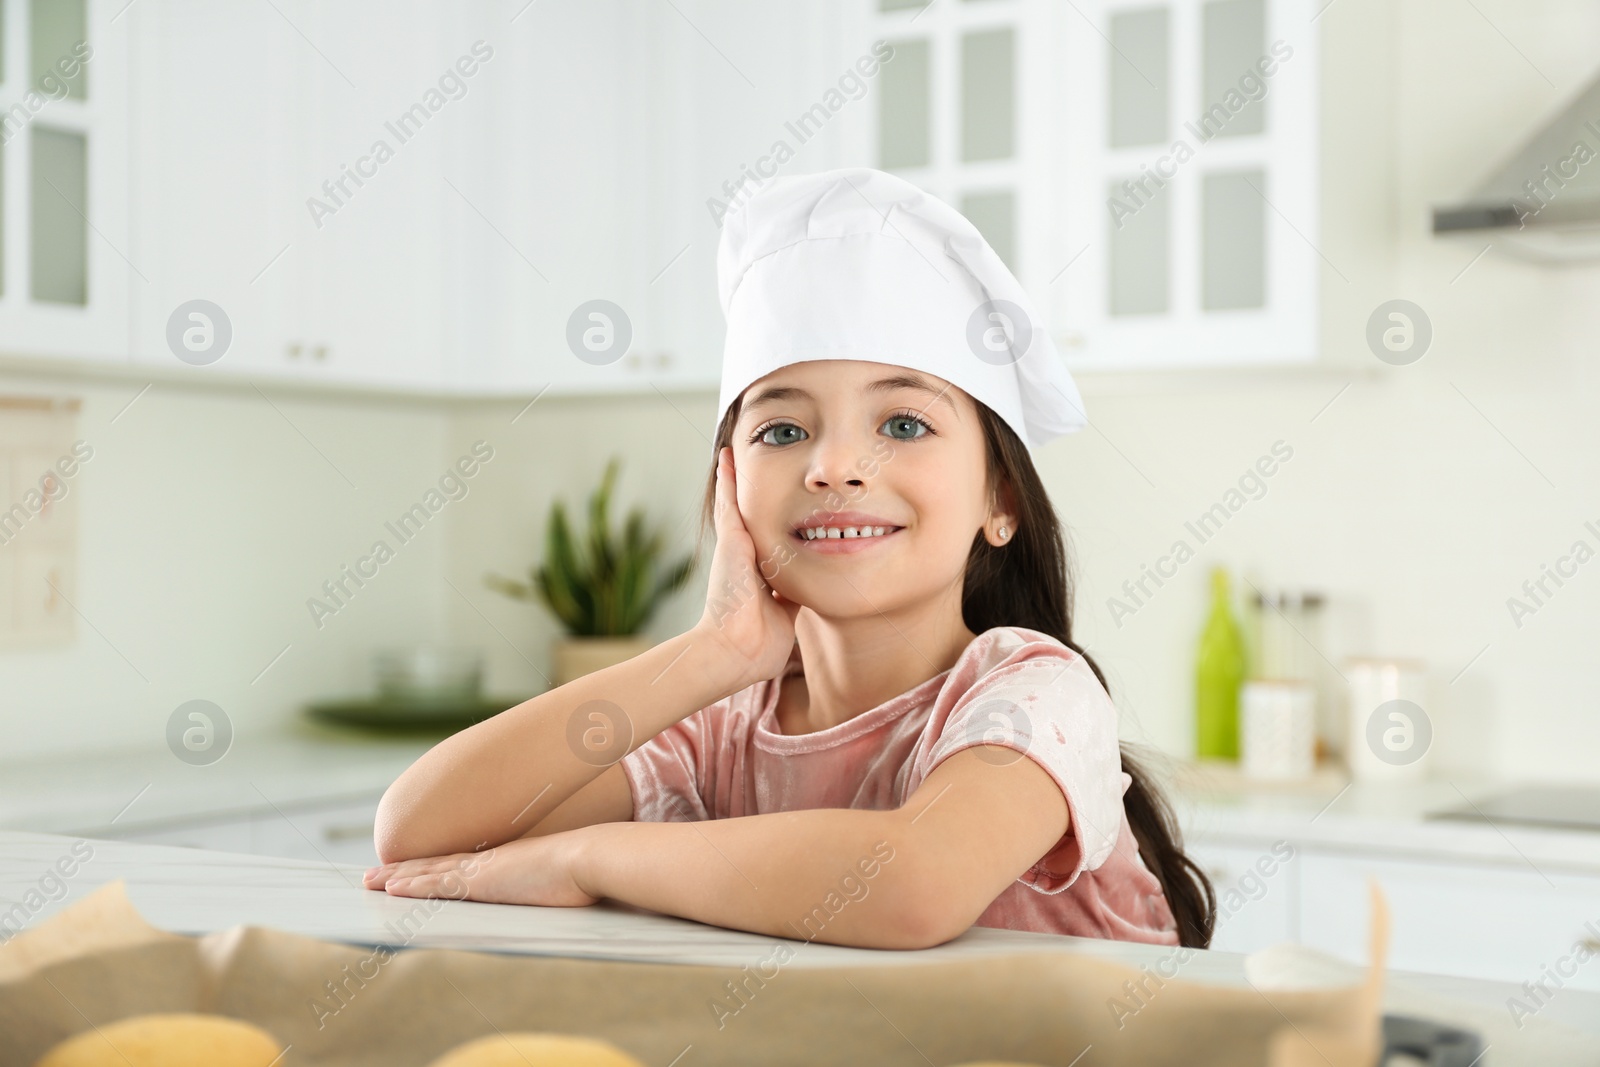 Photo of Cute little girl wearing chef hat in kitchen